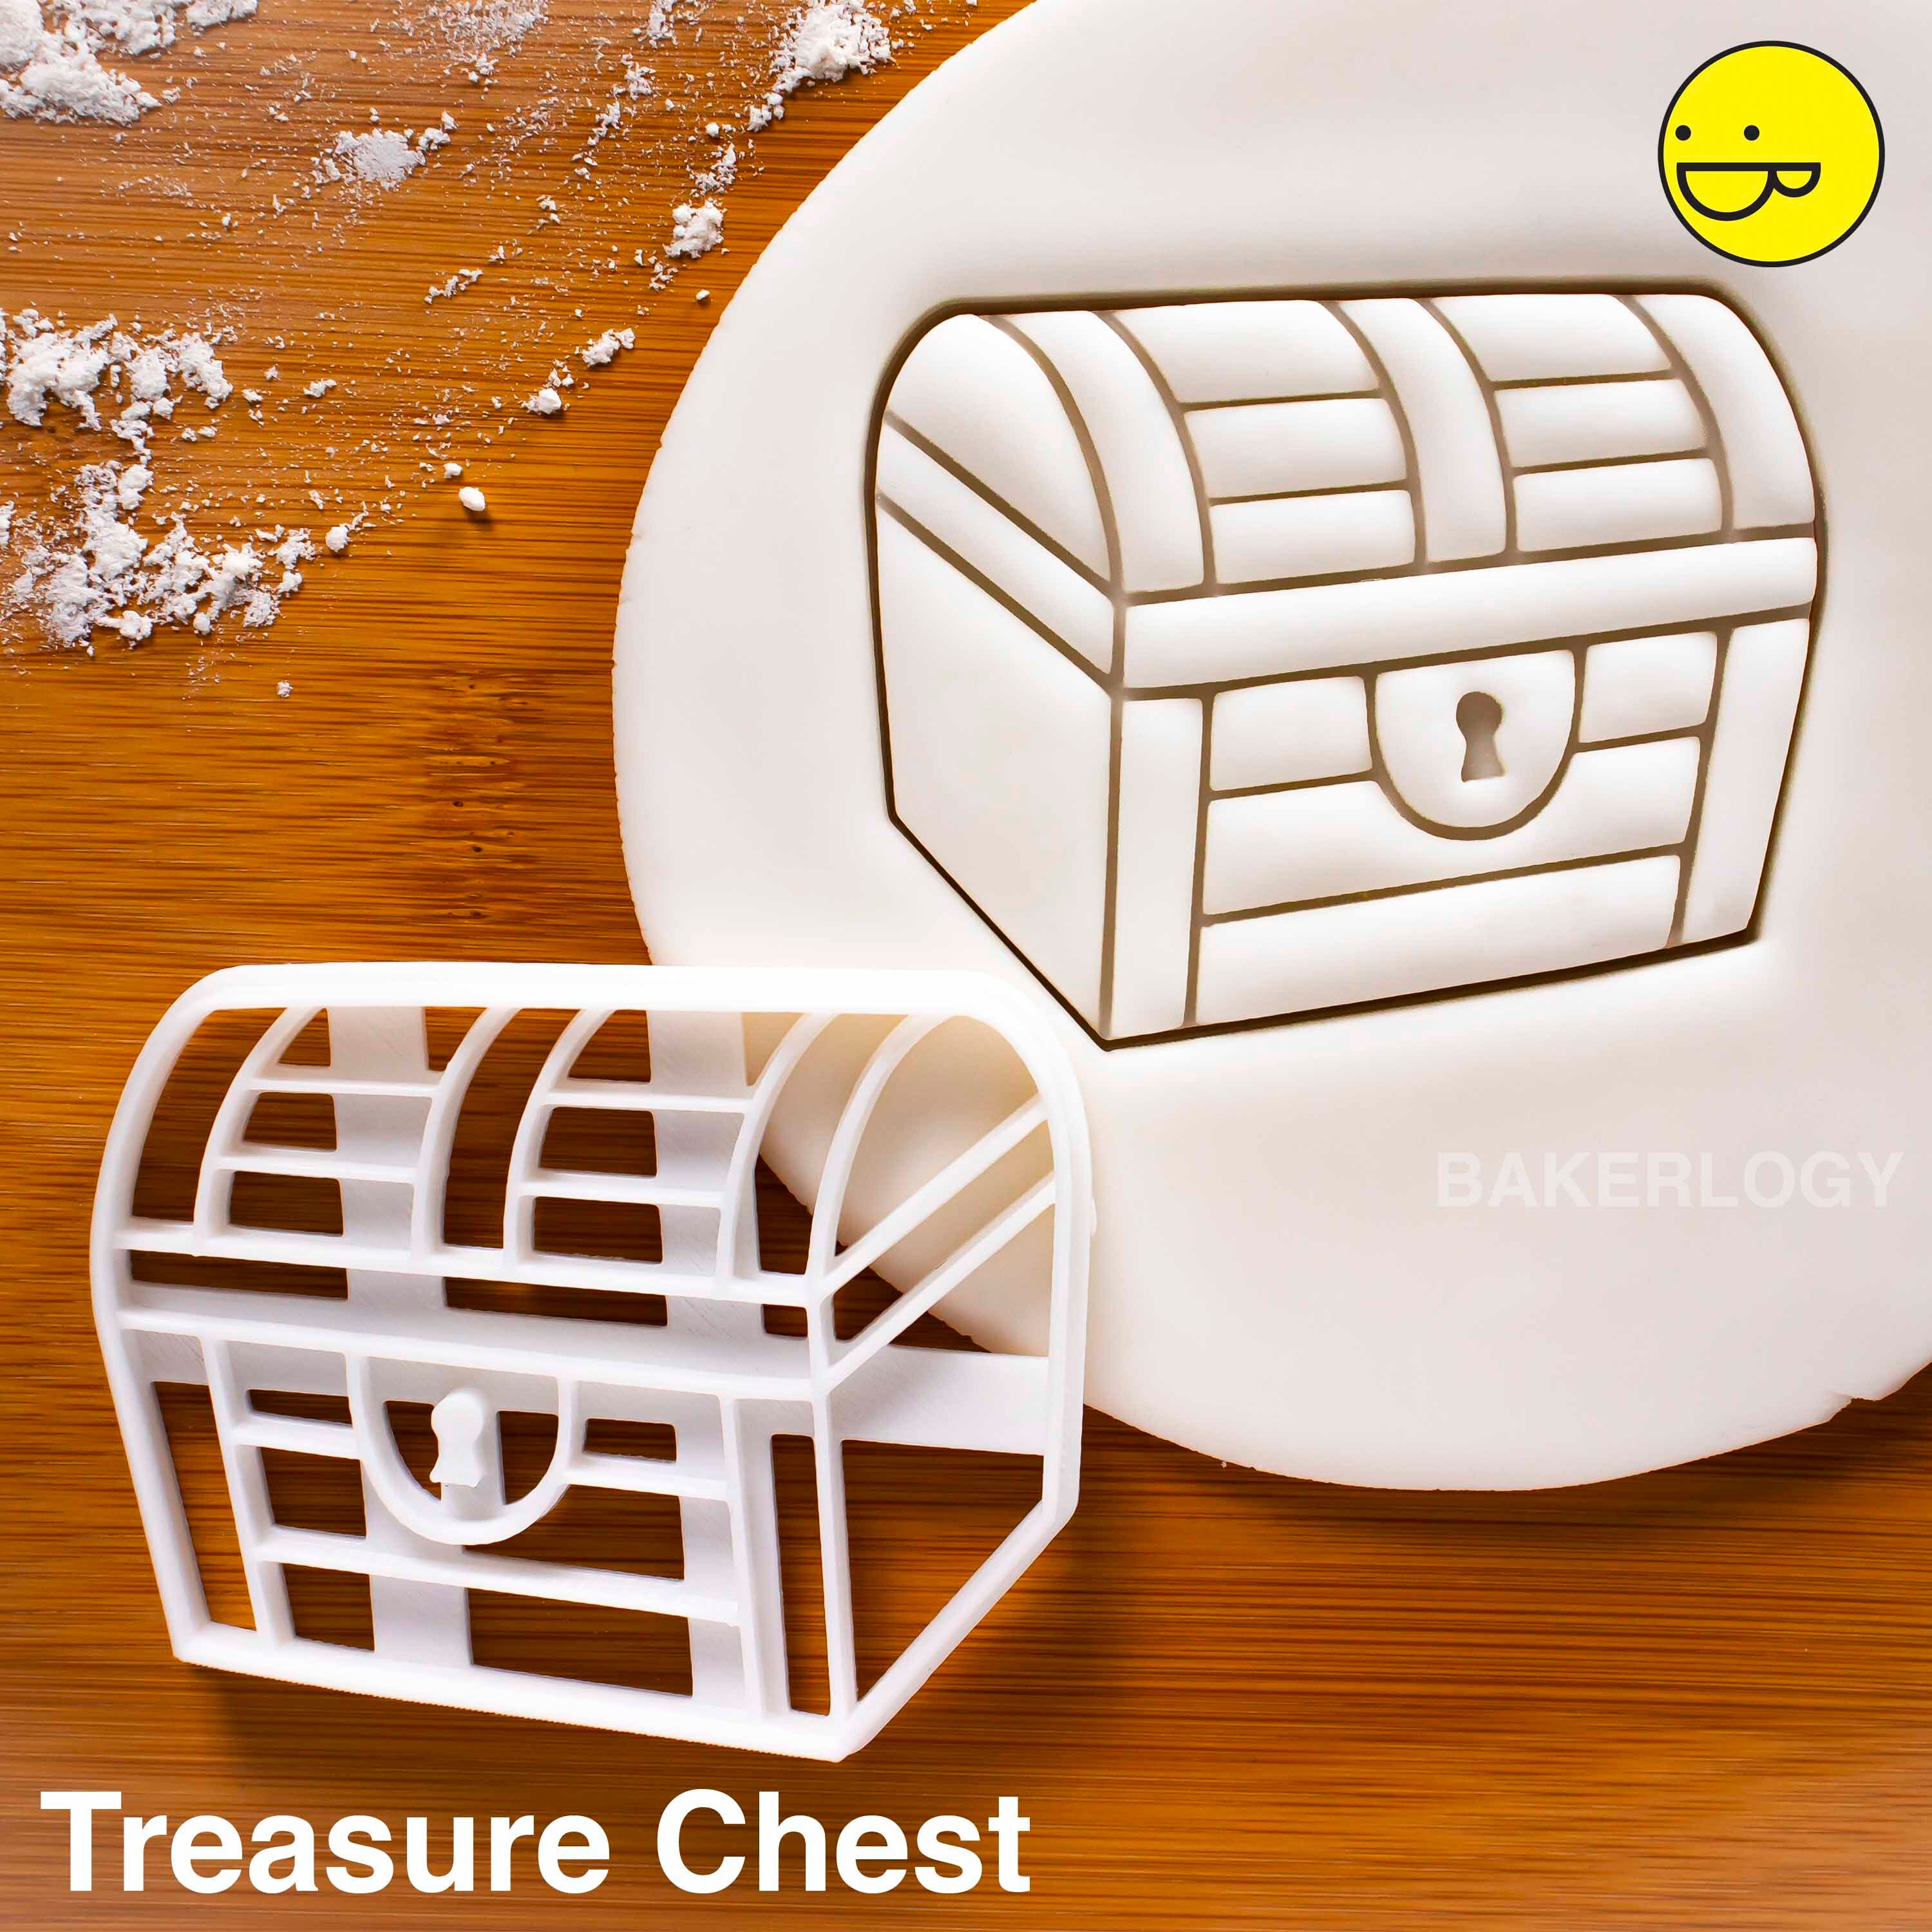 Treasure Chest Cookie Cutter Nautical Beach Baby Shower Cookies Kids  Birthday Party Clues Ideas Game Scavenger Hunt Pirate Chests Games -   Australia